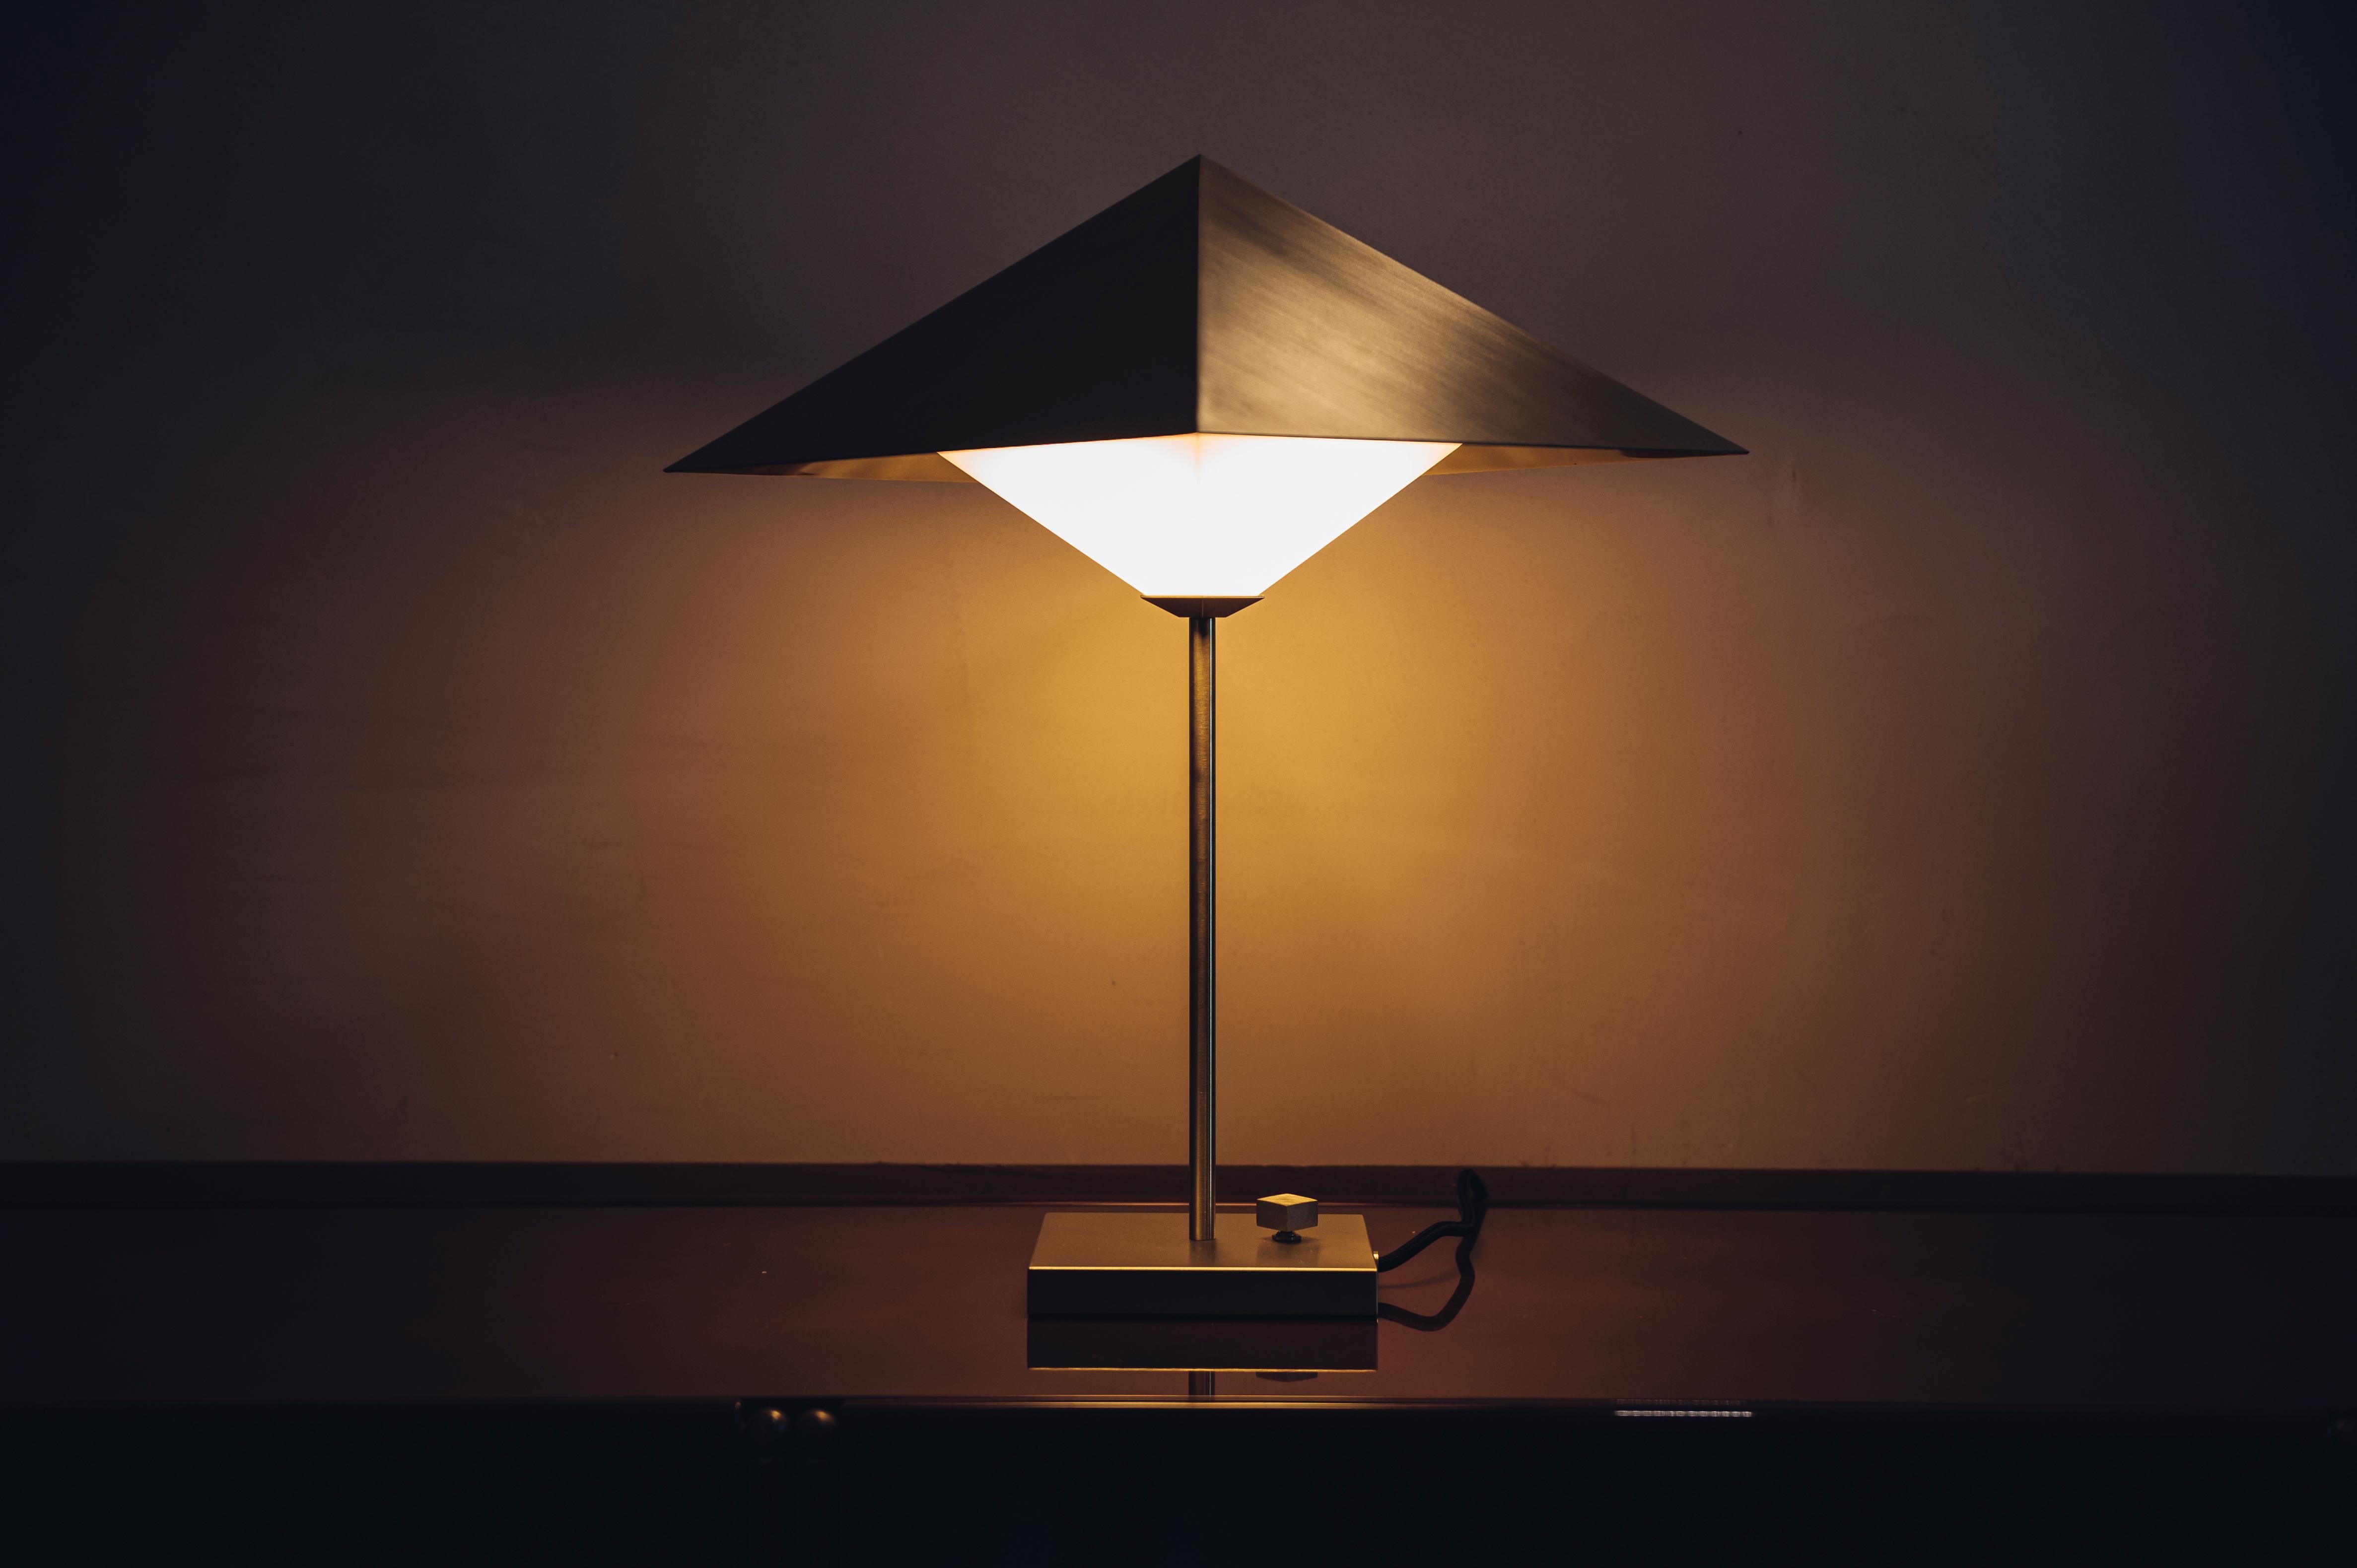 The dominant feature of OCTA’s table lamp is its square pyramidal shade. The acute angles of the pyramid are emphasized by the brushing direction, which remains consistent in the base and rotary switch.

The pyramid’s cavity reveals a set of